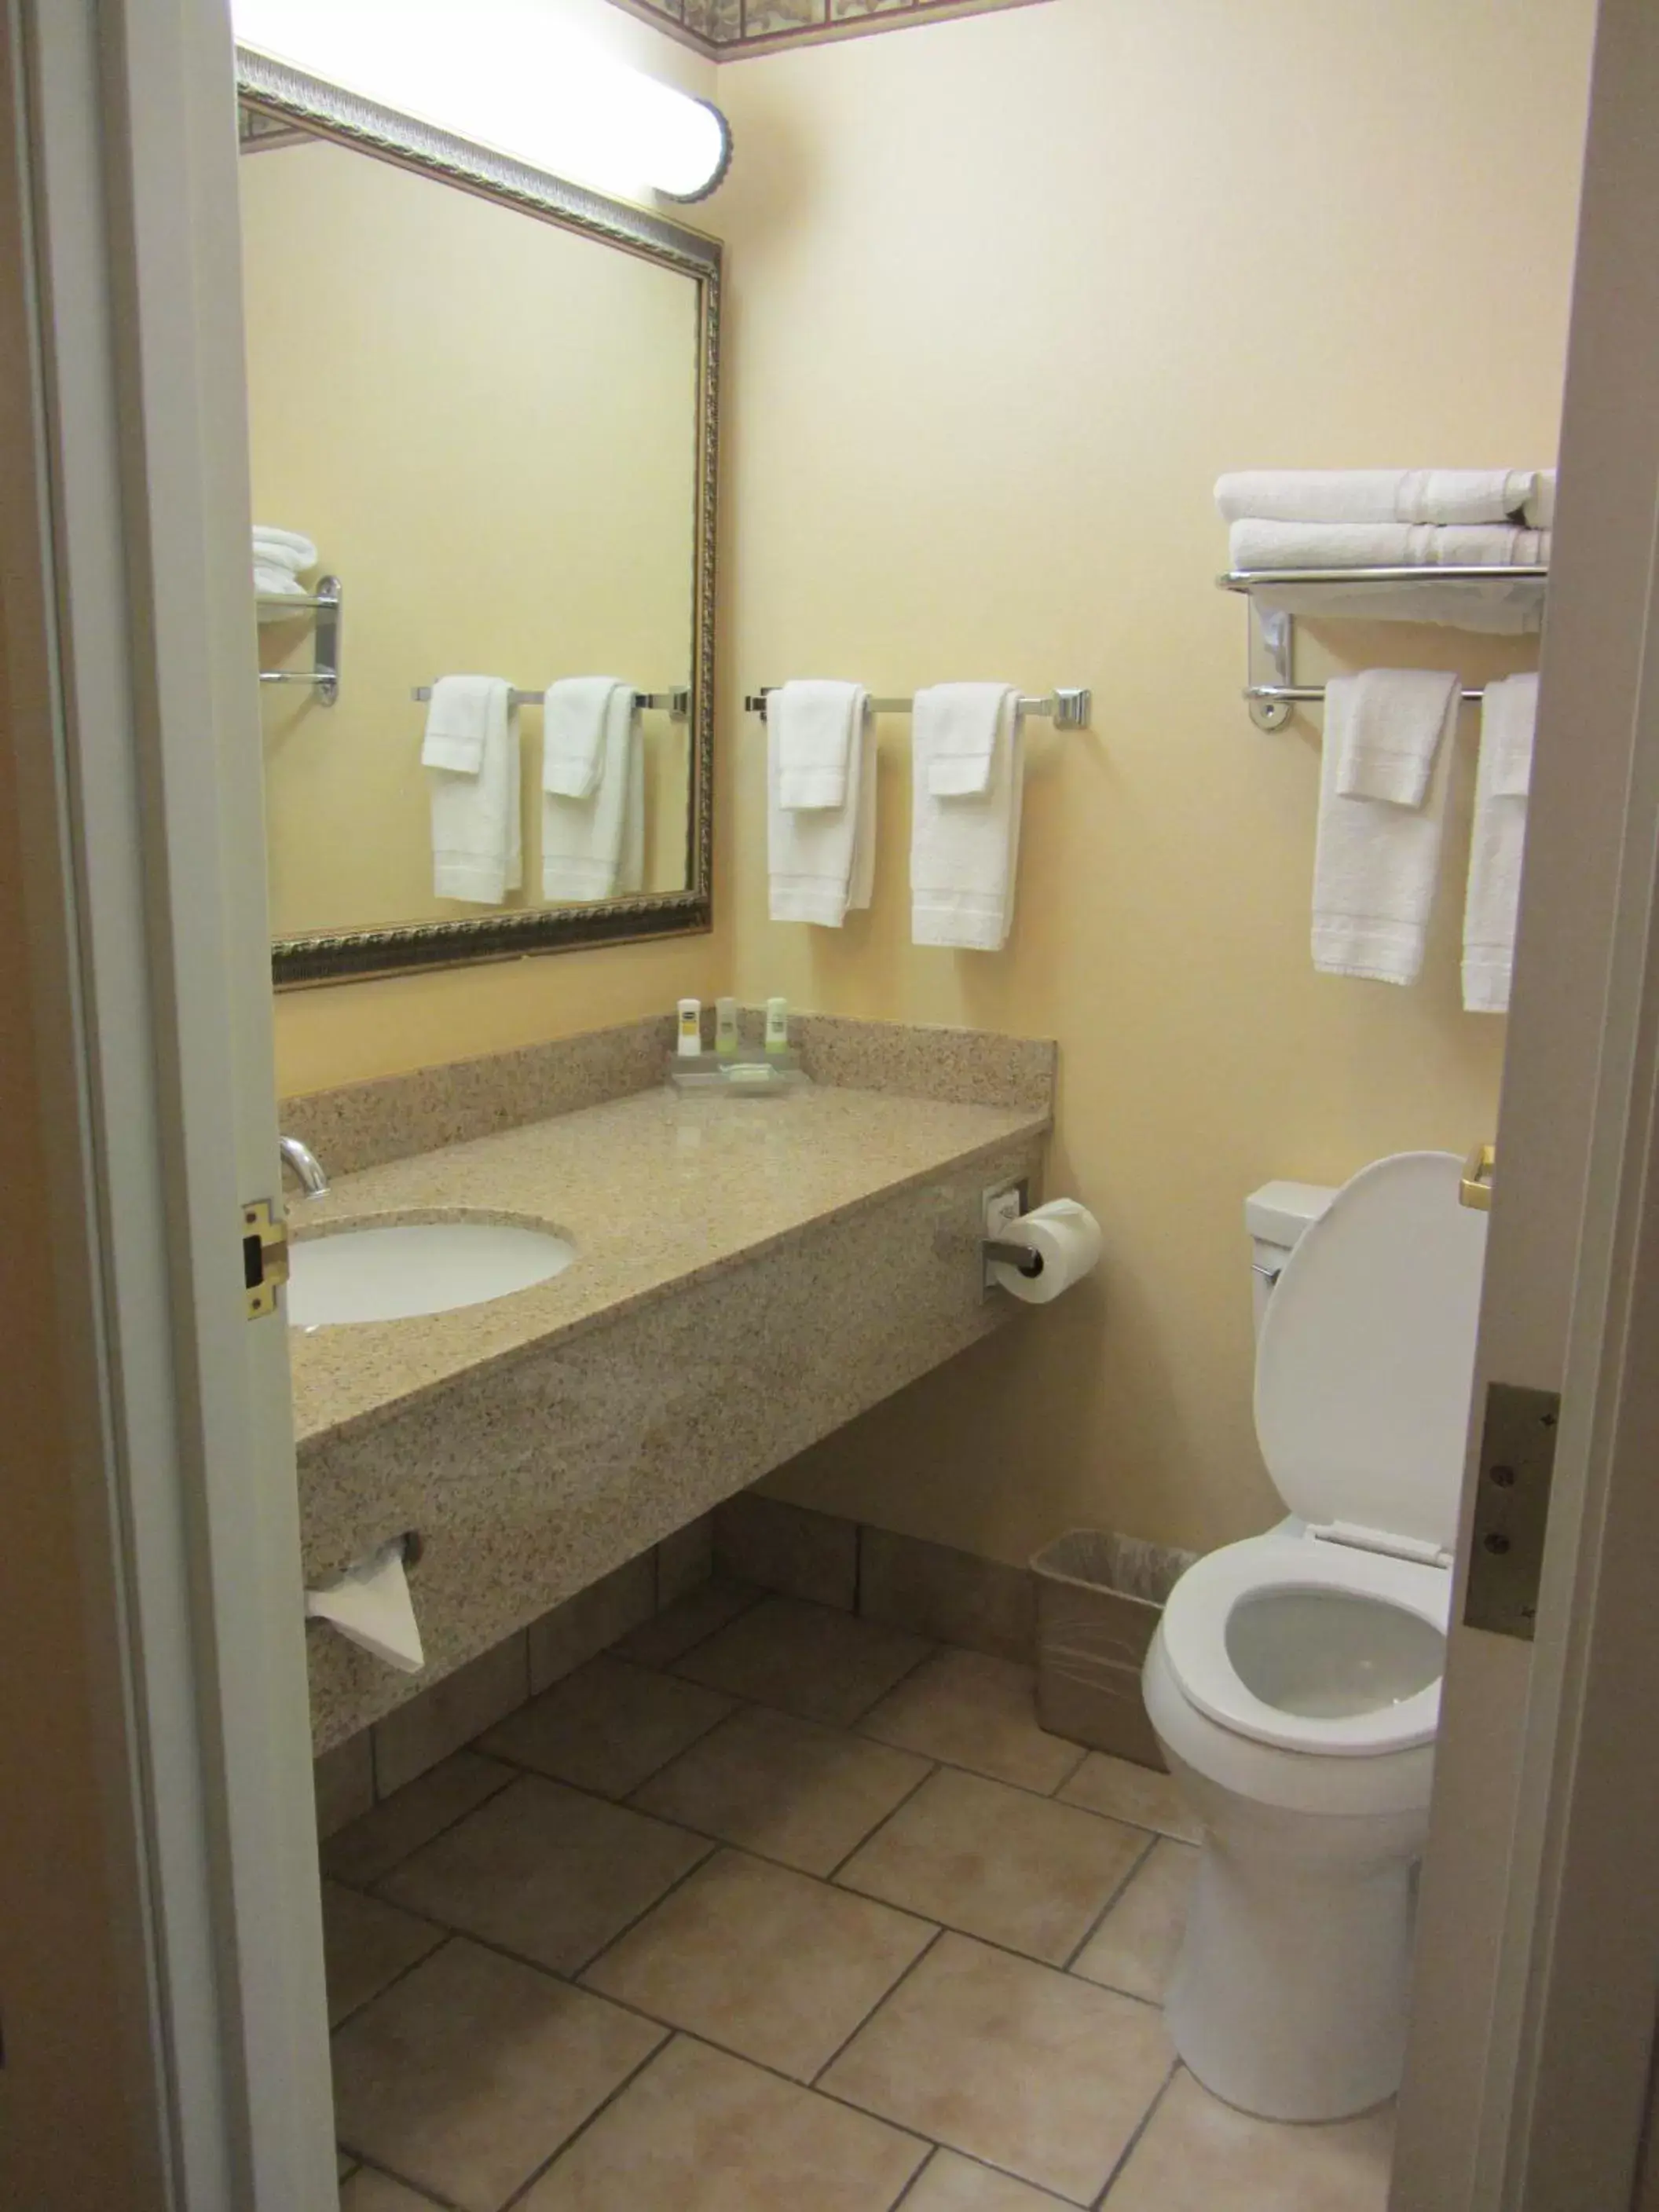 Bathroom in Country Inn & Suites by Radisson, Amarillo I-40 West, TX